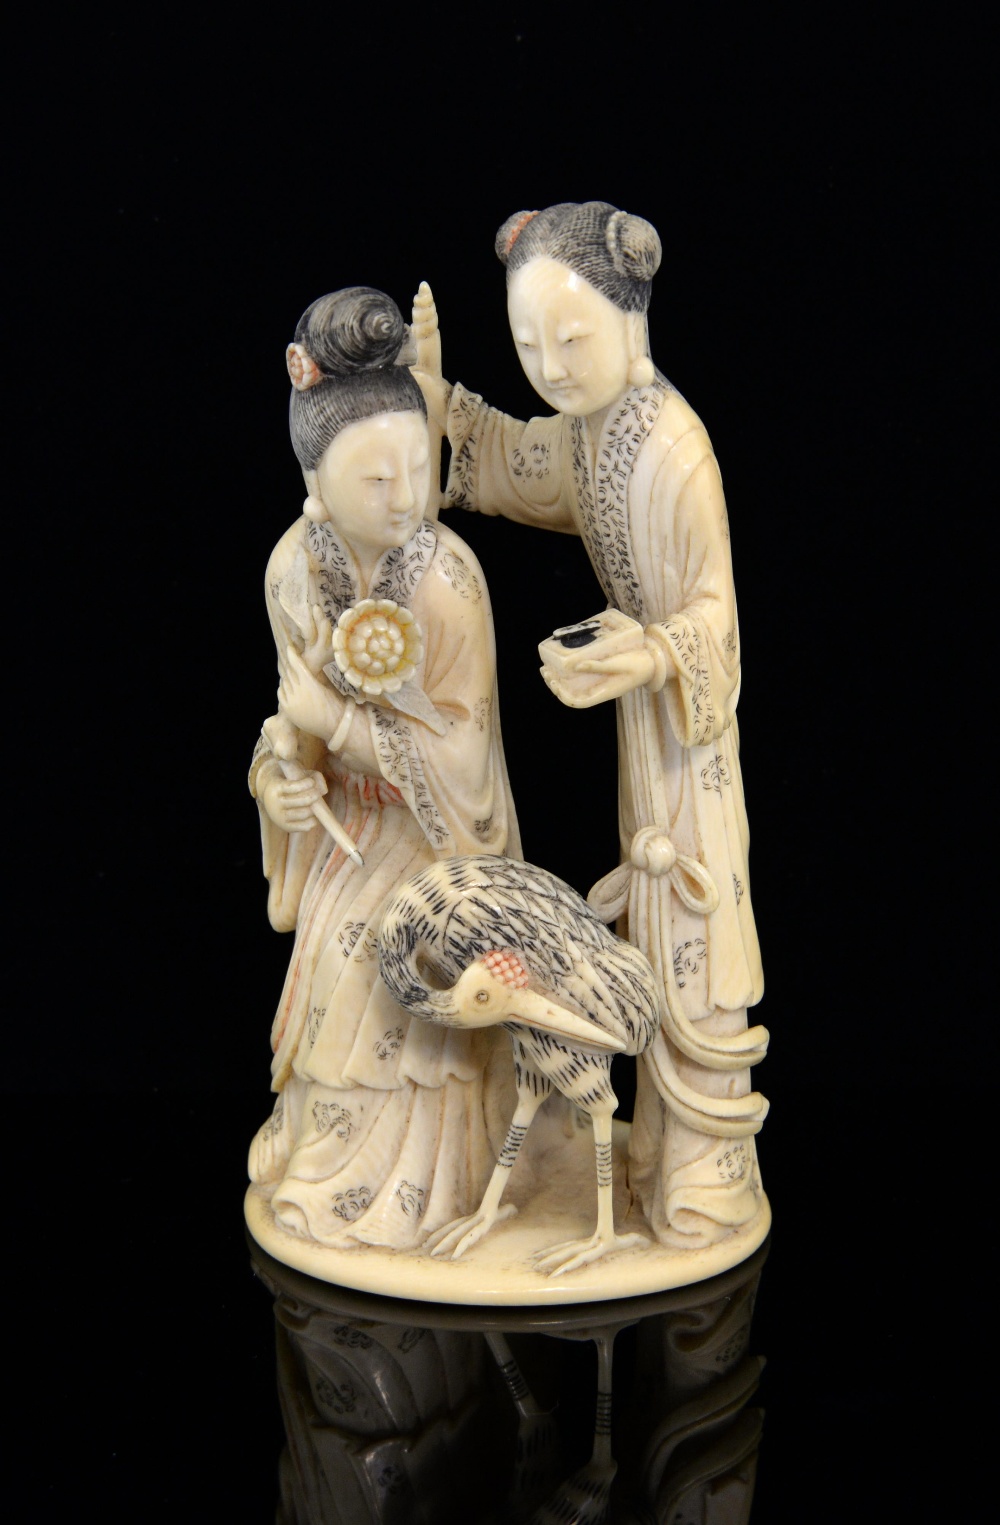 19th century Chinese carved ivory figural group of two ladies holding objects, one standing the